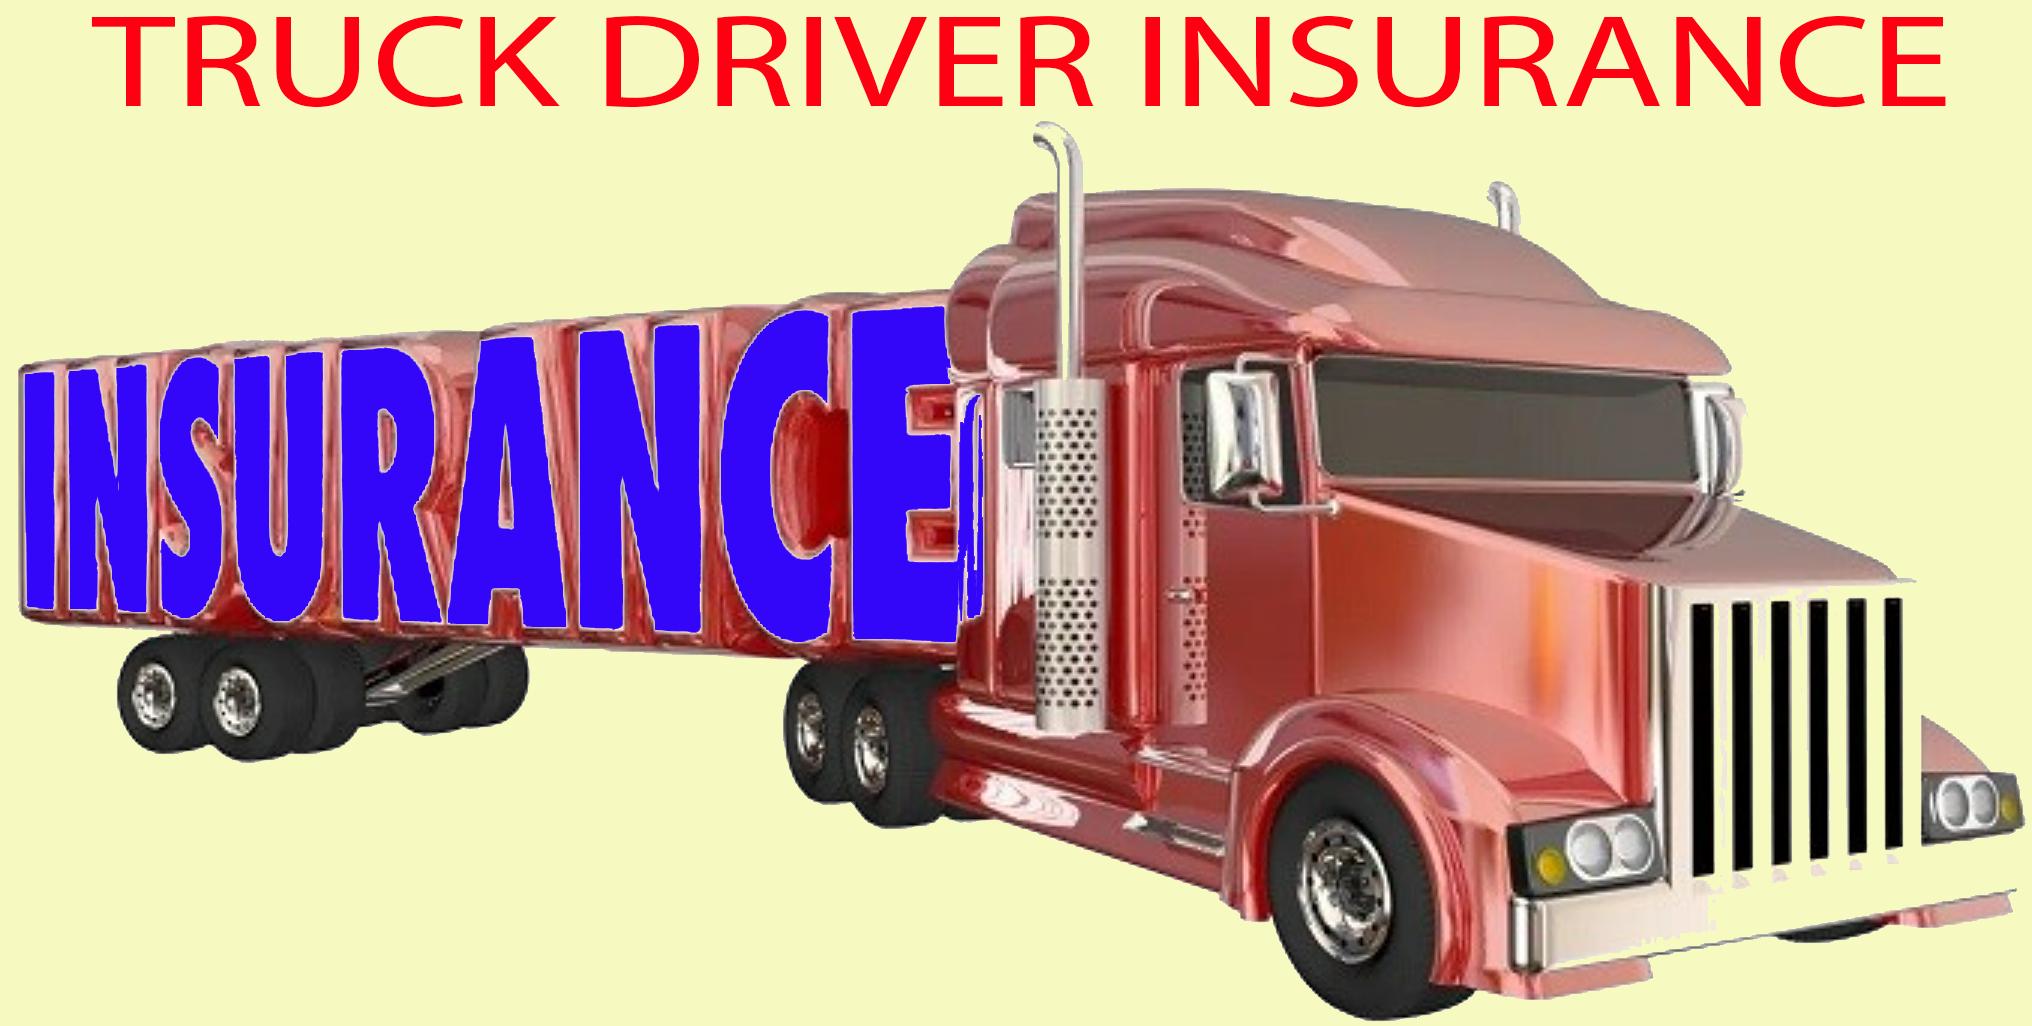 Truck Driver Insurance Protecting Your Journey On The Road